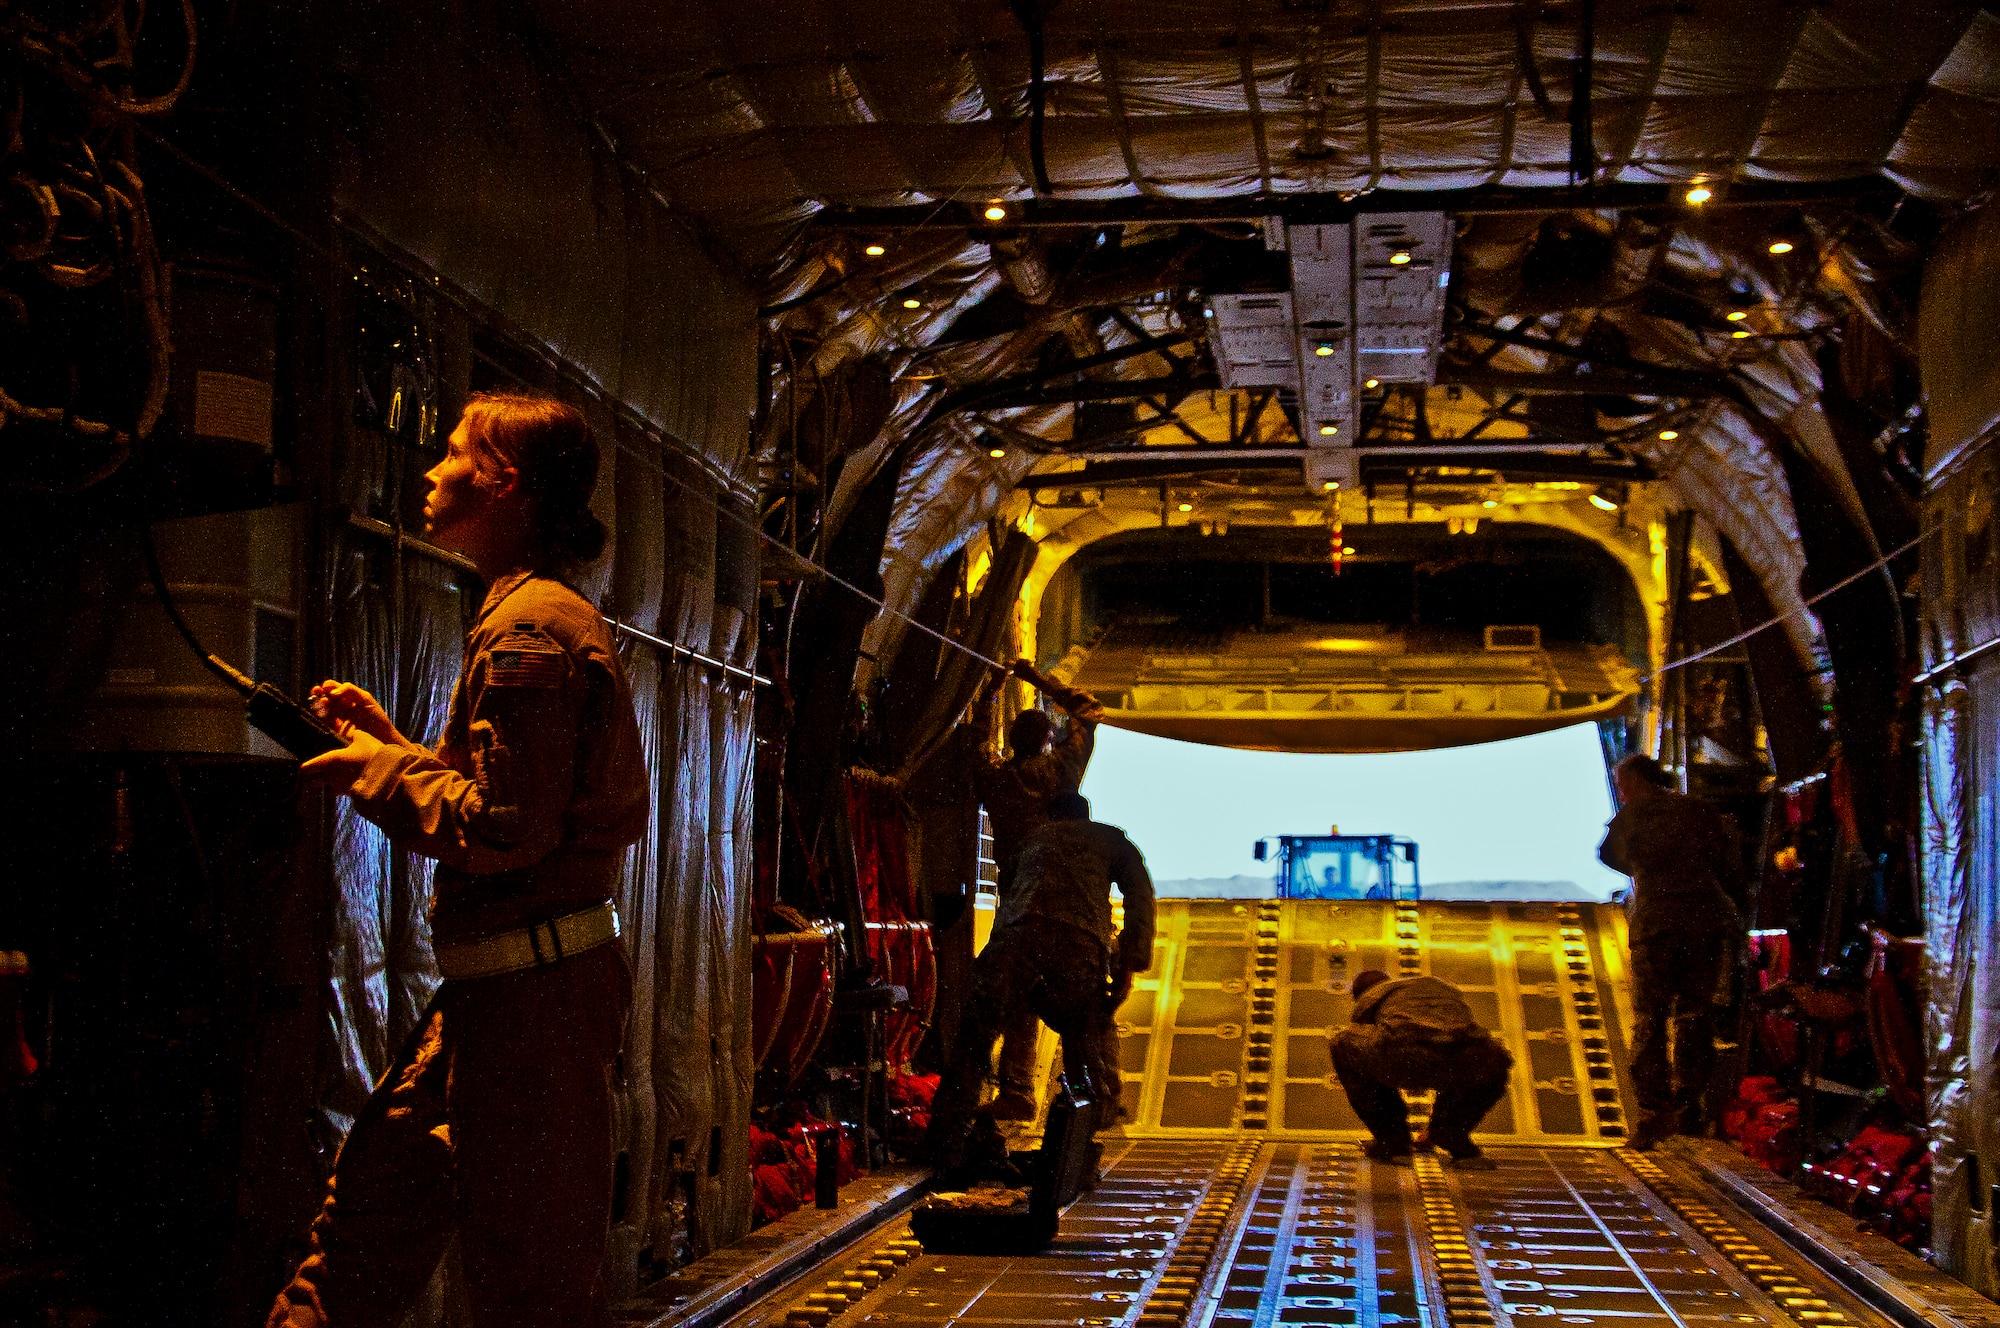 Airmen prepare a C-130J Hercules for an airdrop mission April 29. The airdrop mission was the first use of Extracted Container Delivery System in Afghanistan, a new, more accurate, method of airdrop designed to pull the bundles out of the aircraft faster than a normal airdrop, while resulting in a smaller dispersion of bundles in the drop zone. (U.S. Air Force photo by Senior Airman Scott Saldukas)